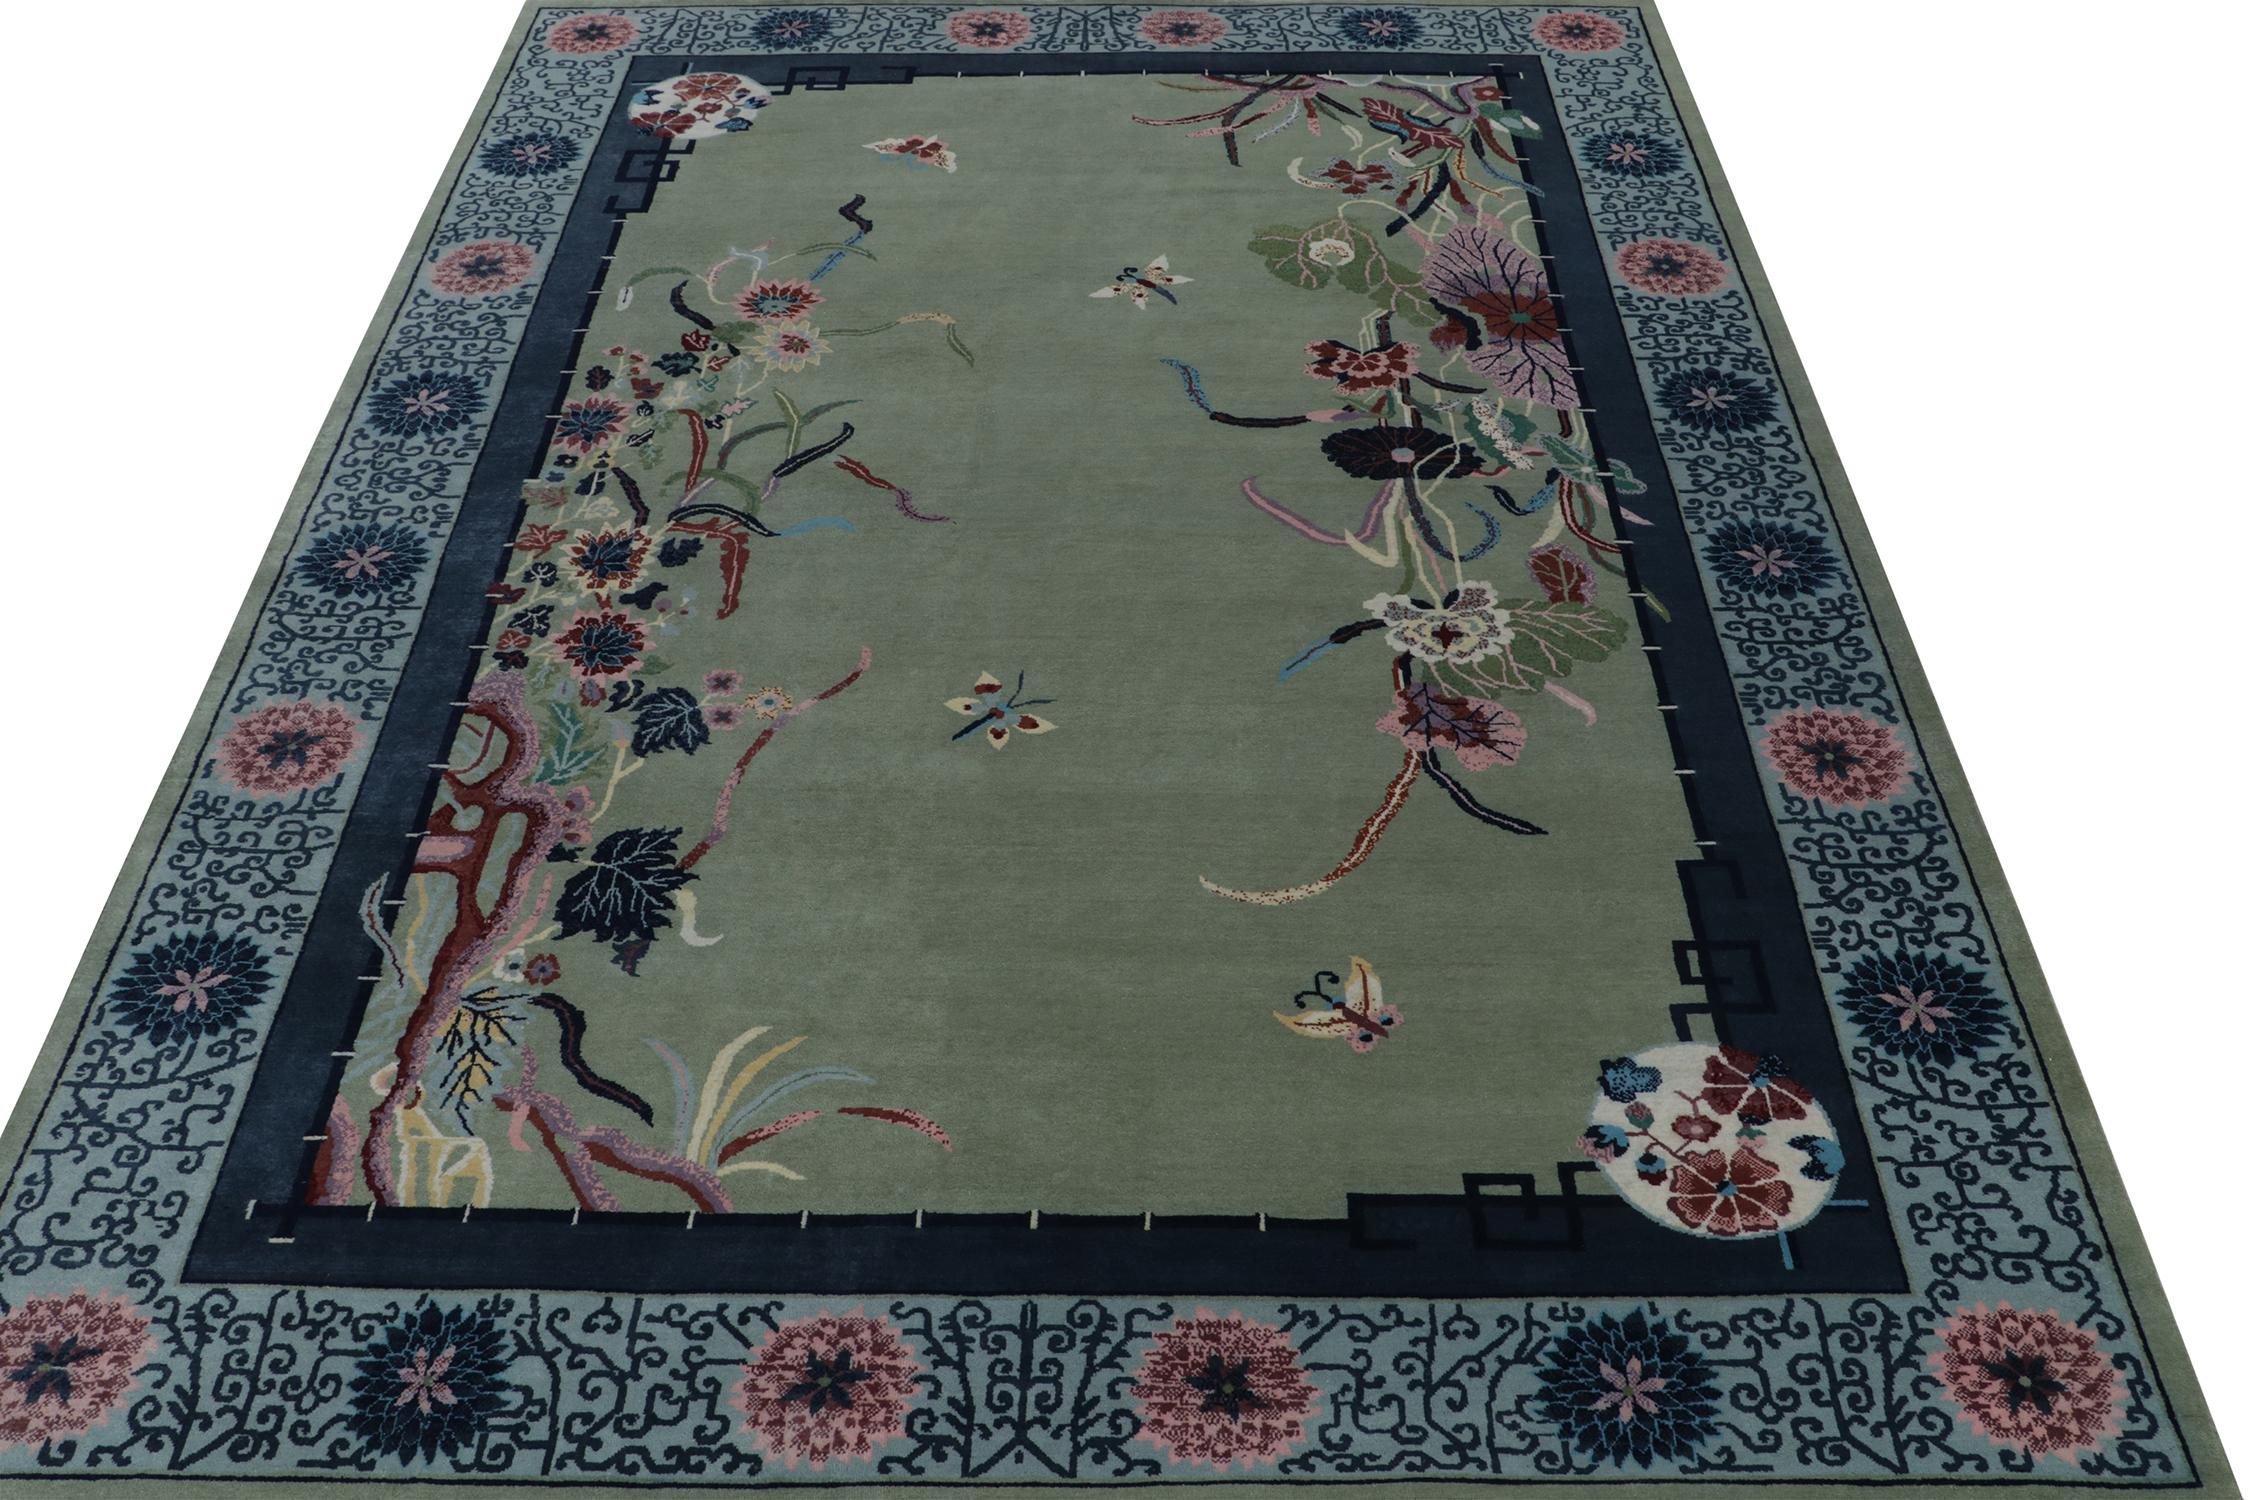 Indian Rug & Kilim’s Chinese Style Art Deco Rug in Green with Blue Floral Patterns